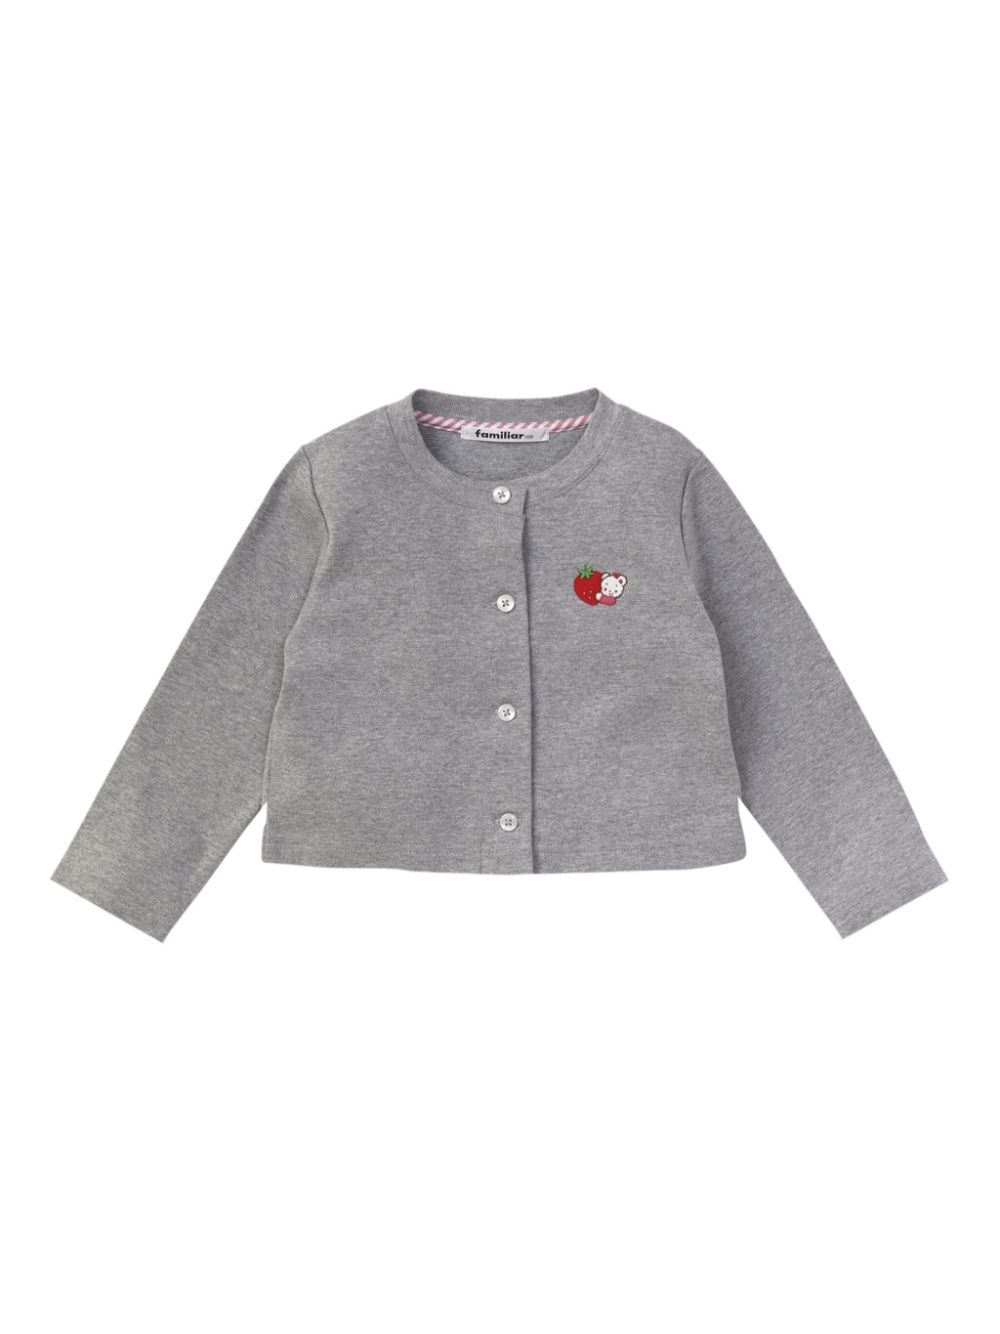 Familiar Kids' Embroidered Motif Cotton Cardigan In Gray